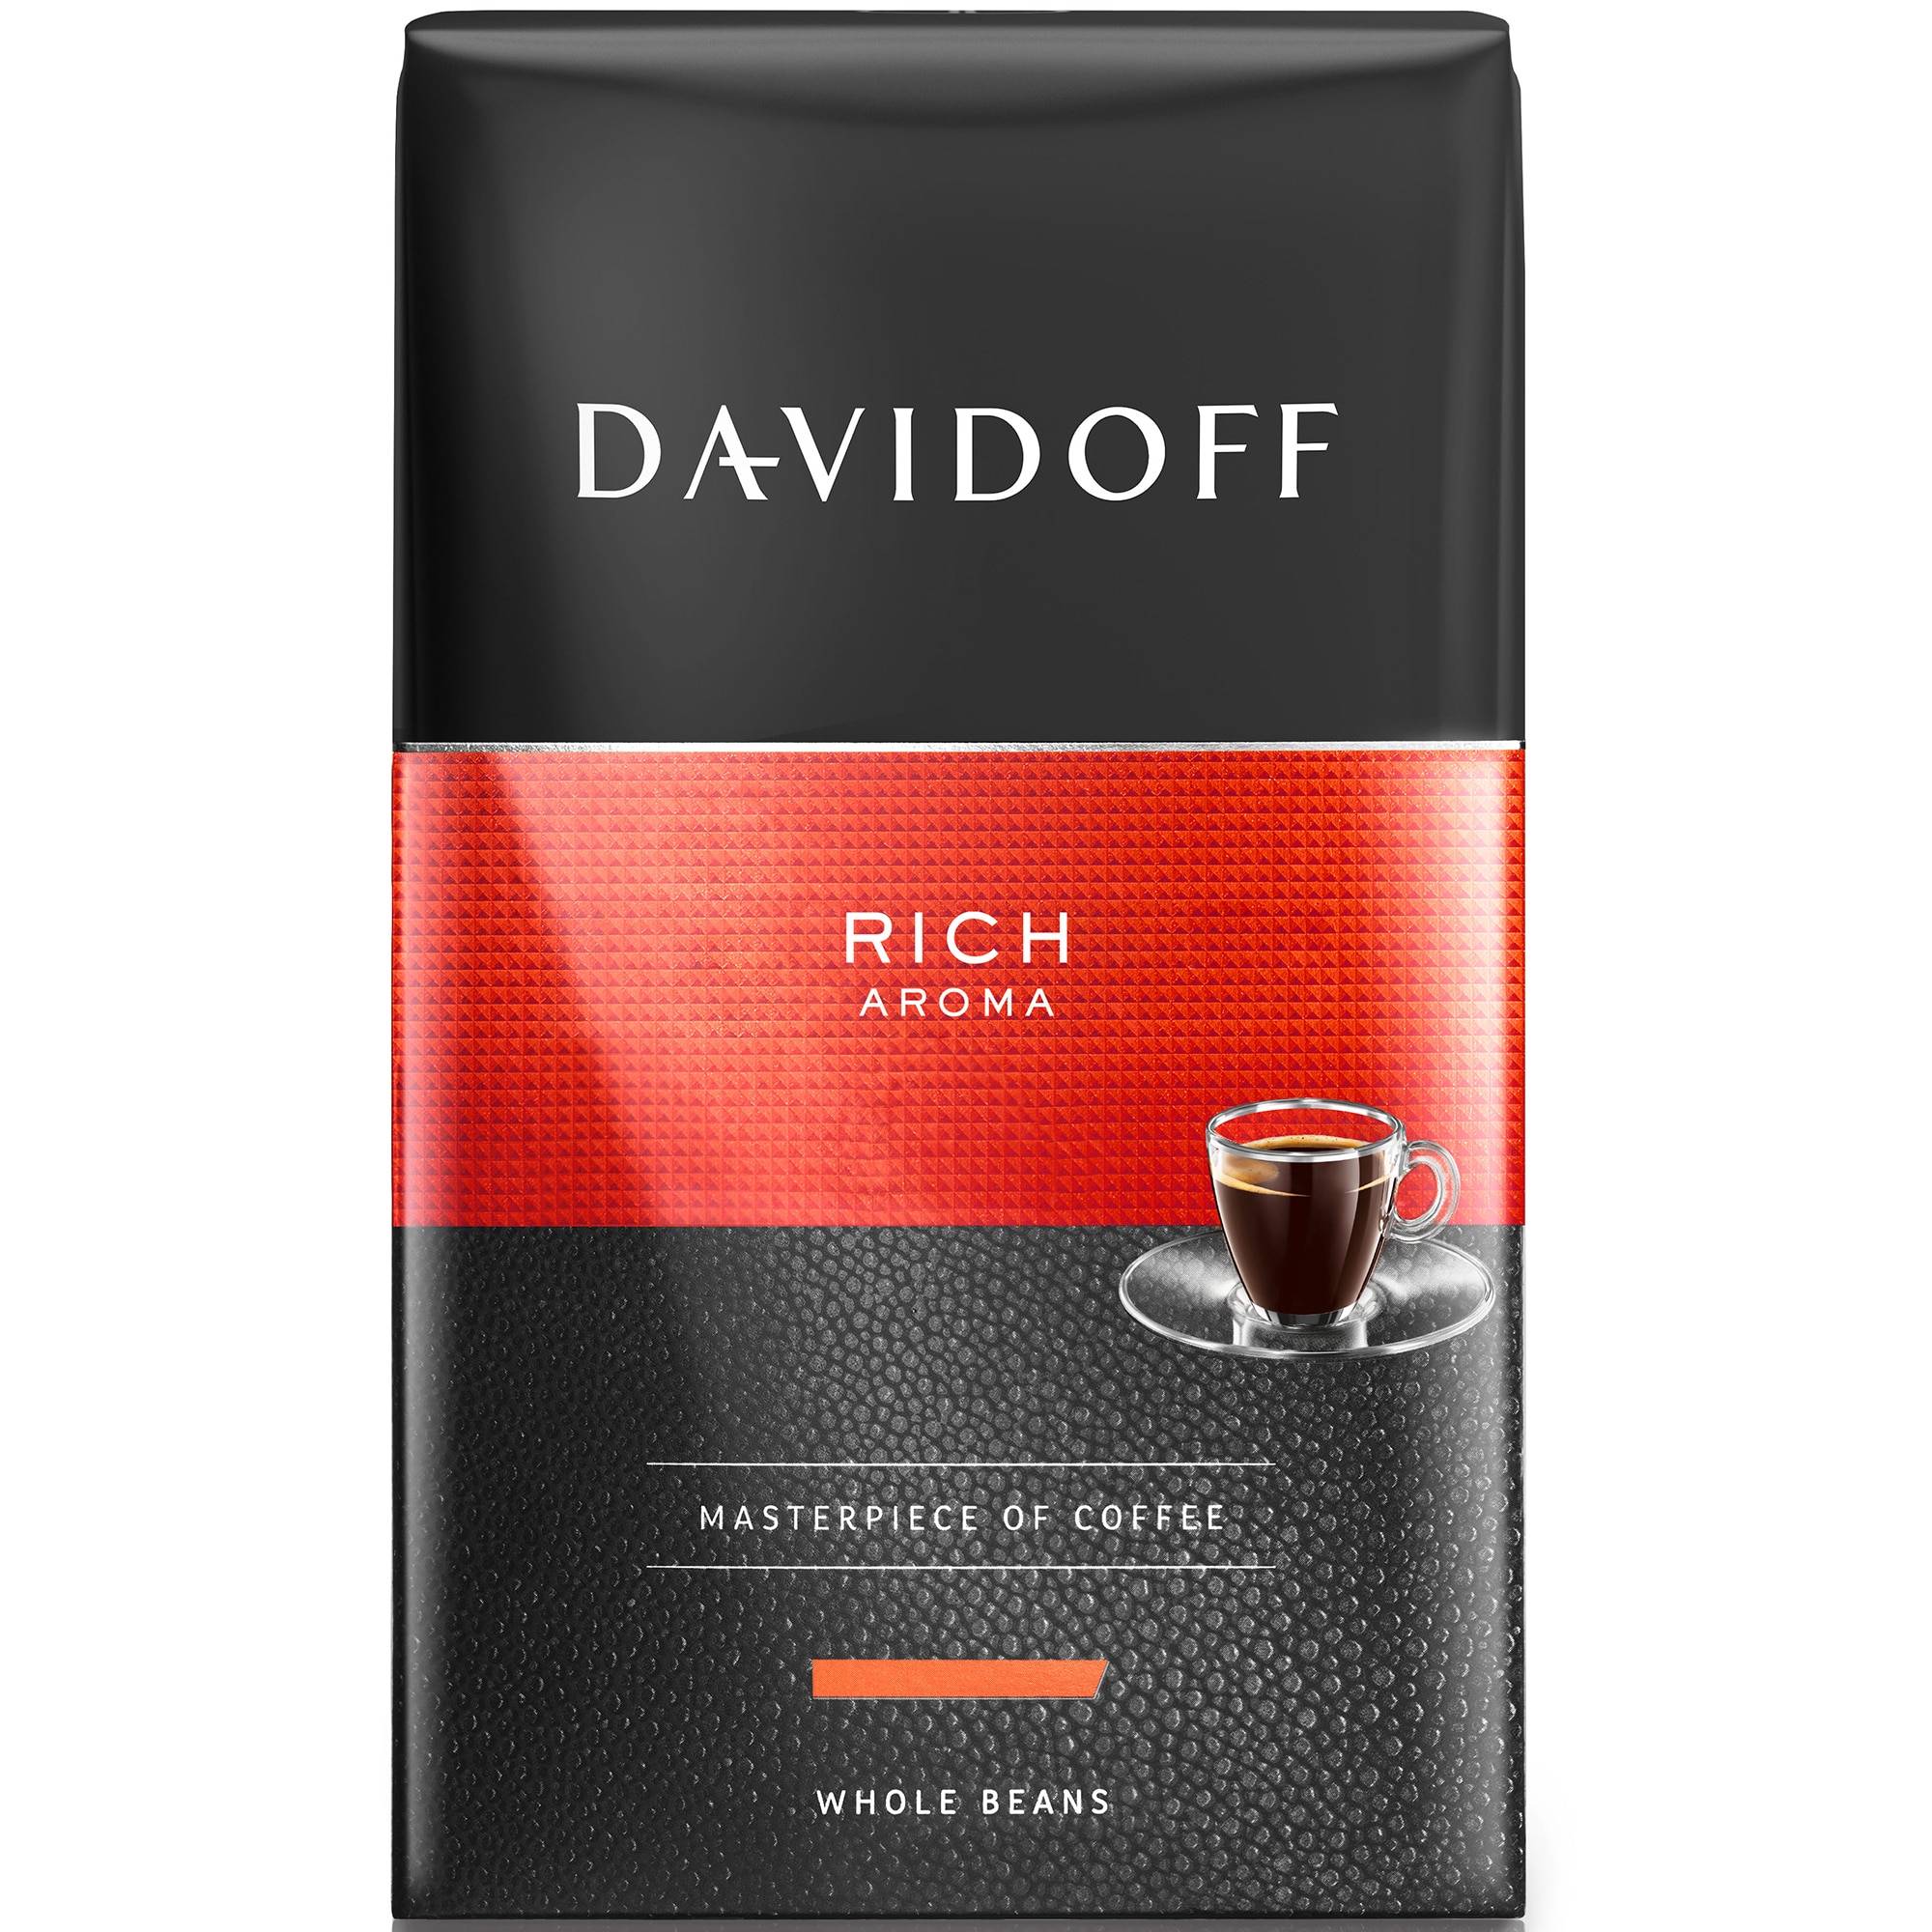 Cafea boabe Davidoff Rich 500g eMAG.ro